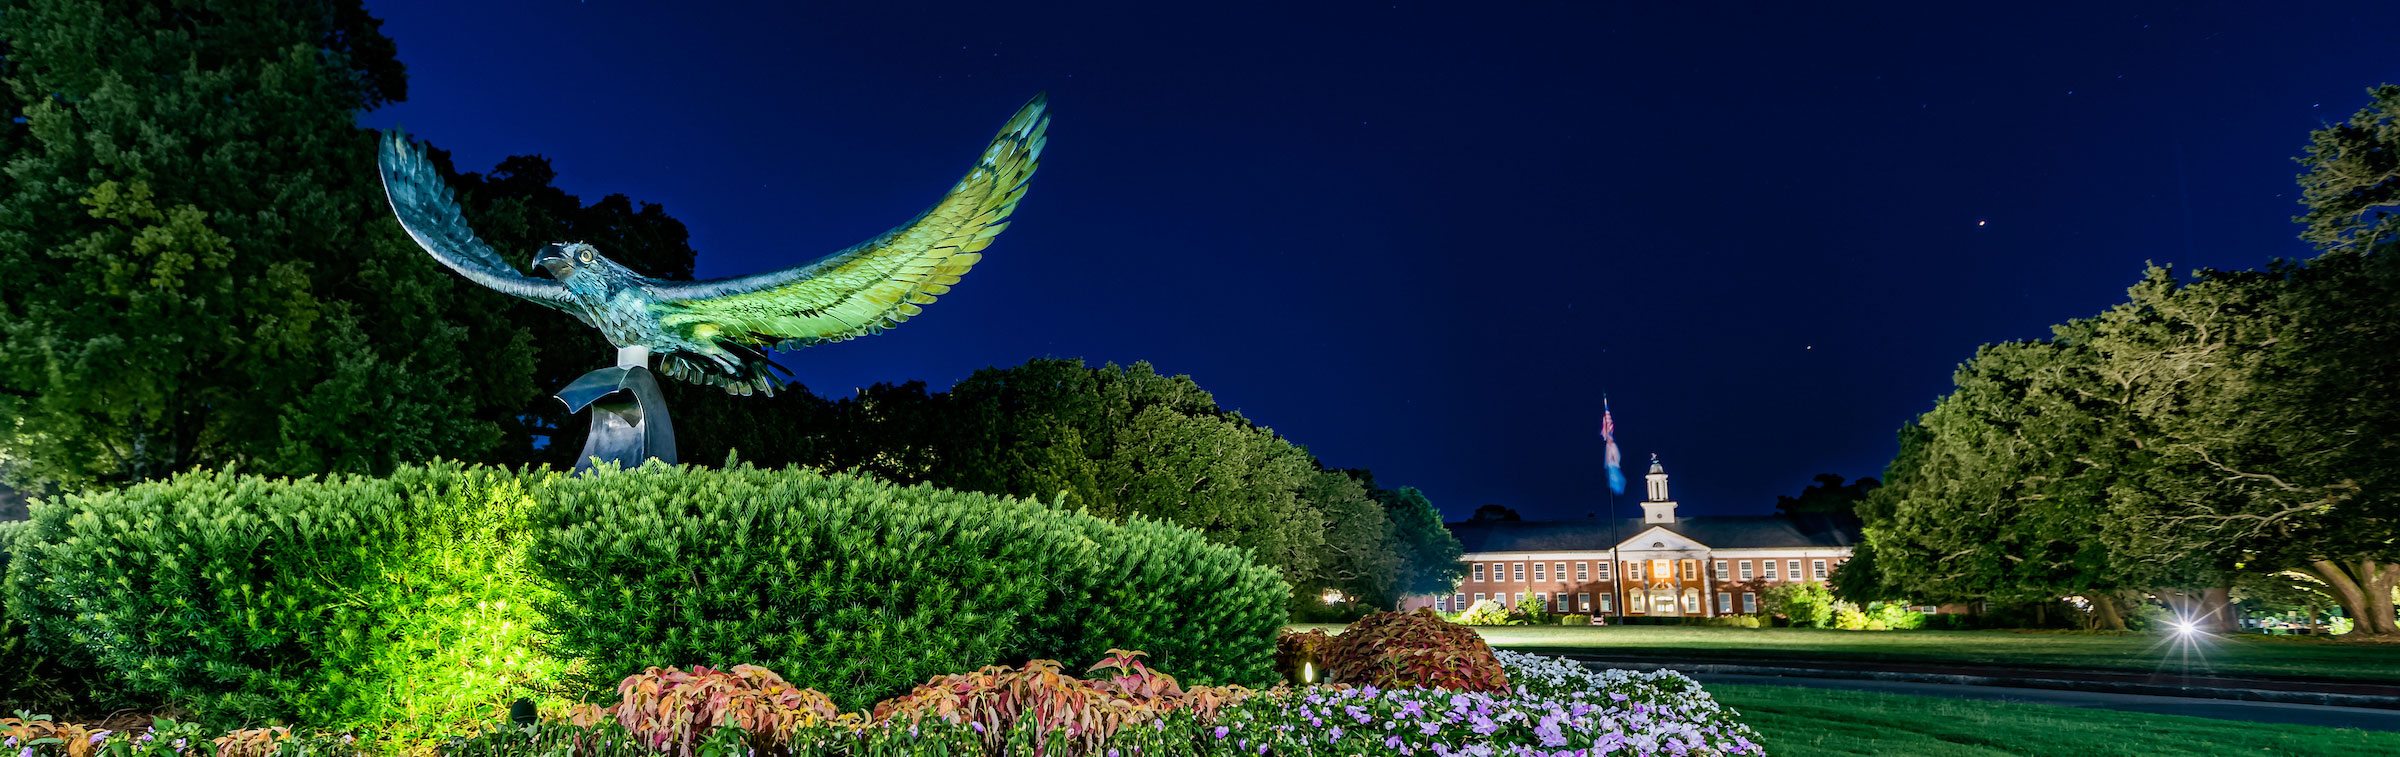 seahawk statue at night in front of hoggard hall